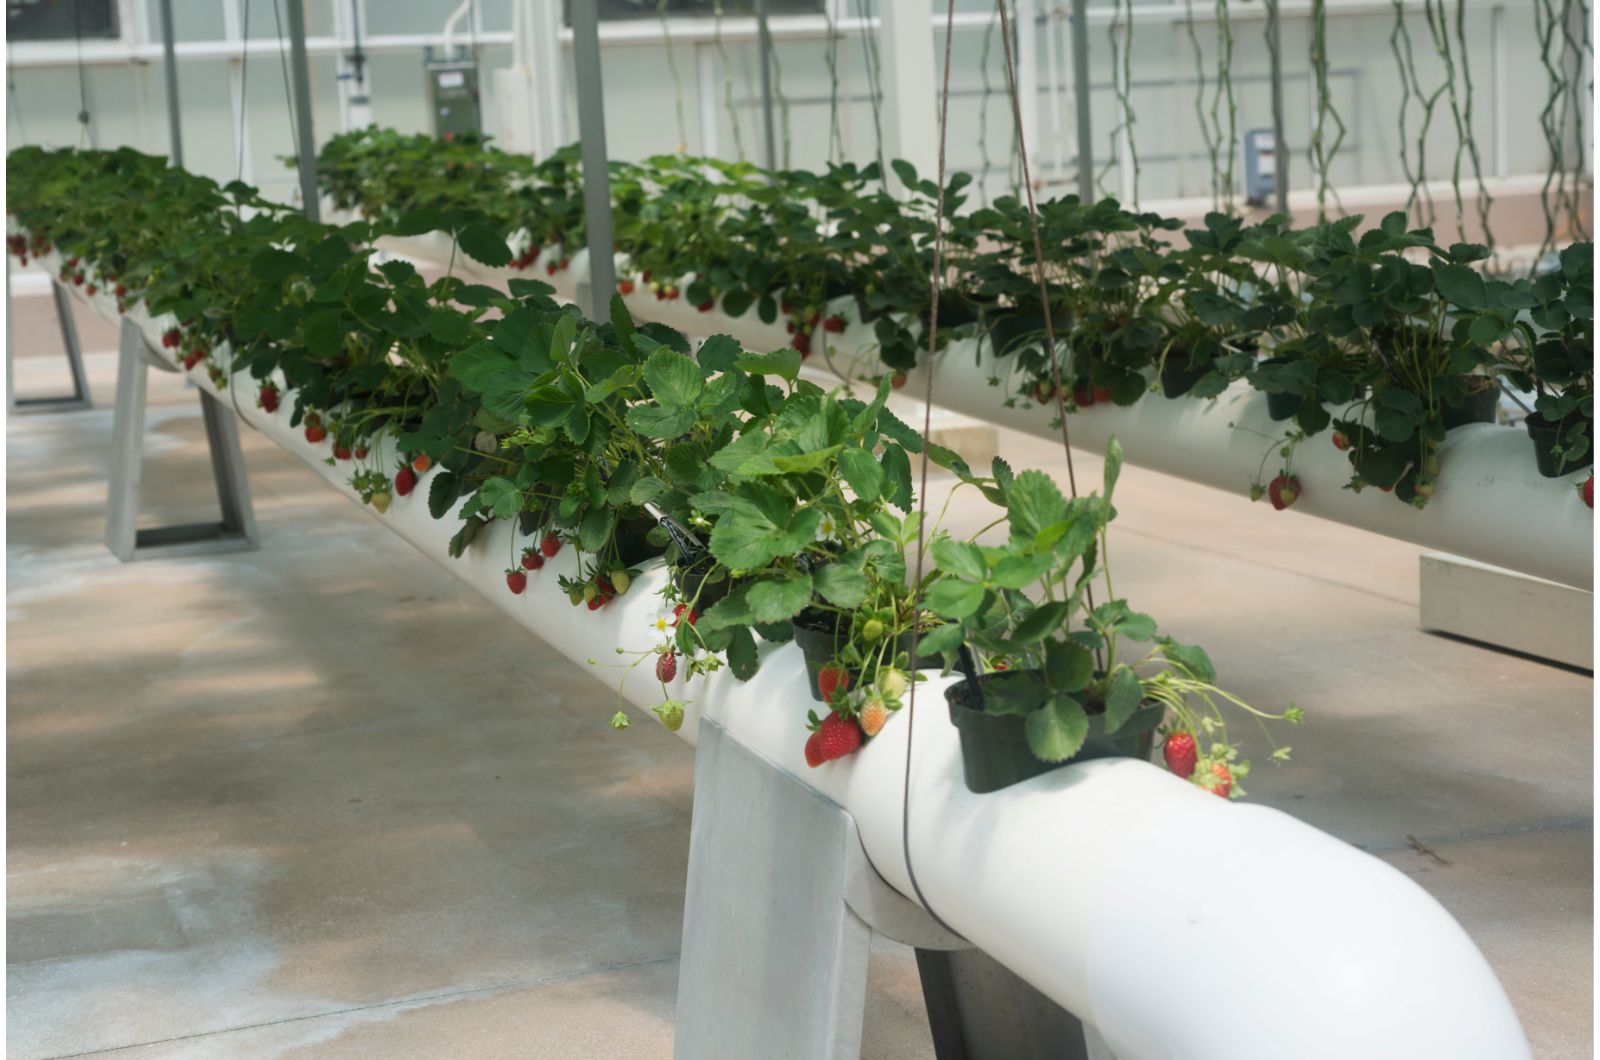 strawberries growing in hydroponic